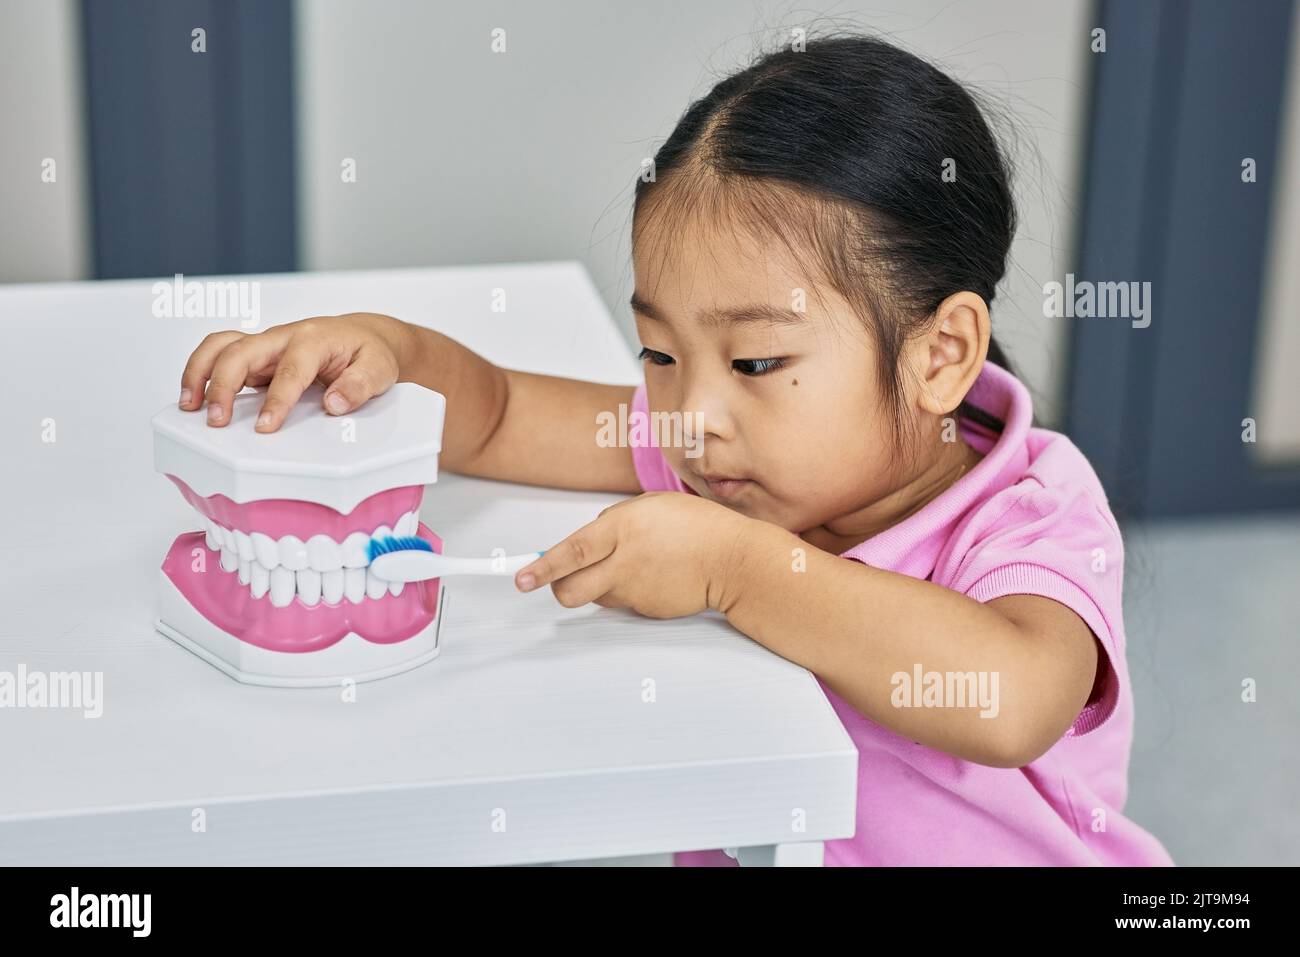 Cute Asian little girl learn how to brush teeth properly using jaw anatomy model and toothbrush. Children's dental care Stock Photo